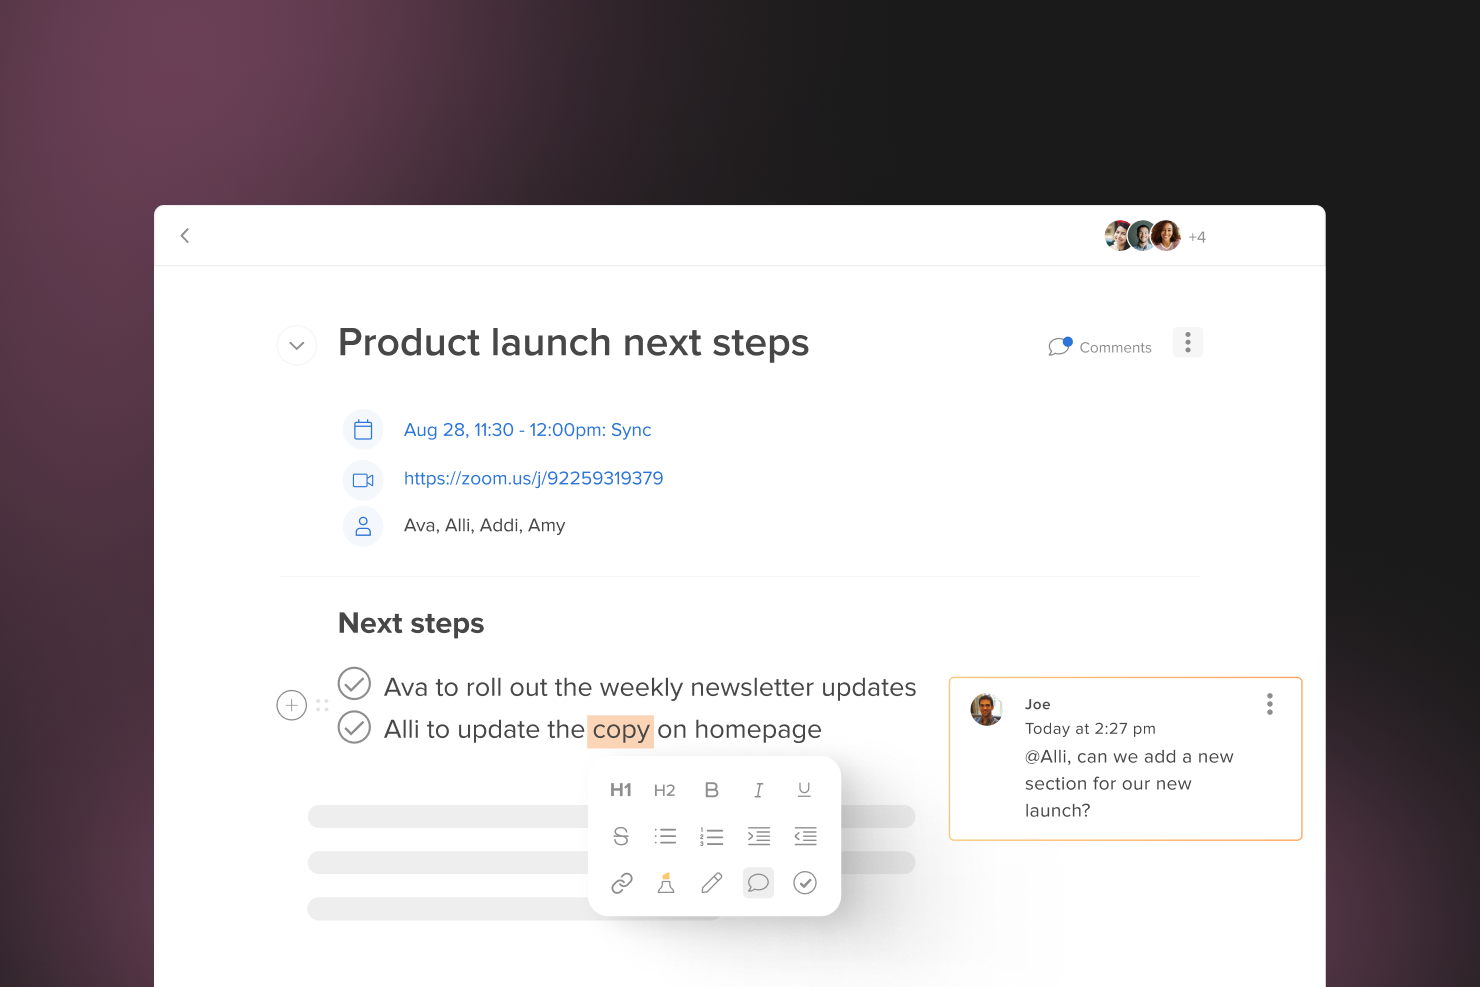 Hive Notes. Collaborate in real-time and turn text into next steps. Create meeting agendas and share them with other participants. From there everyone can type notes, assign tasks, and get to work during the meeting itself. 